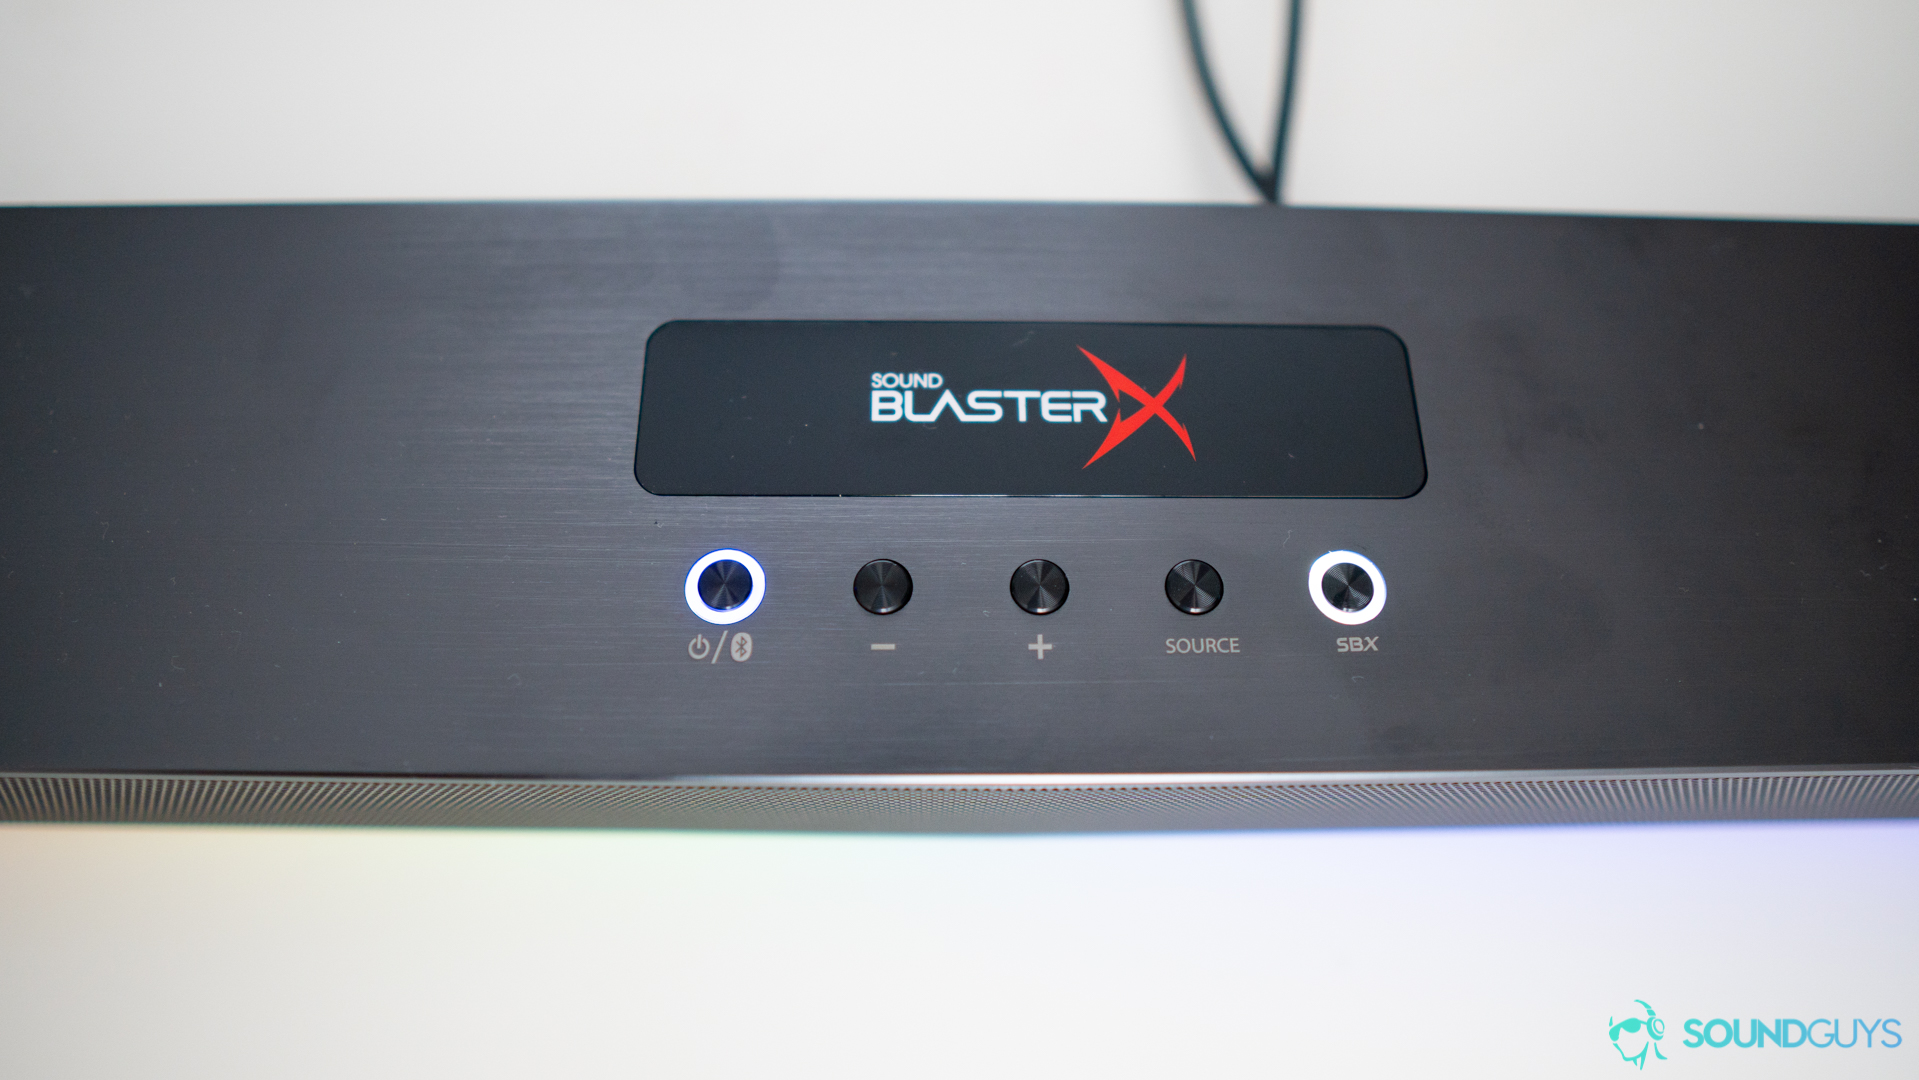 Pictured are the buttons of the Creative Sound BlasterX Katana for power, volume, and more.